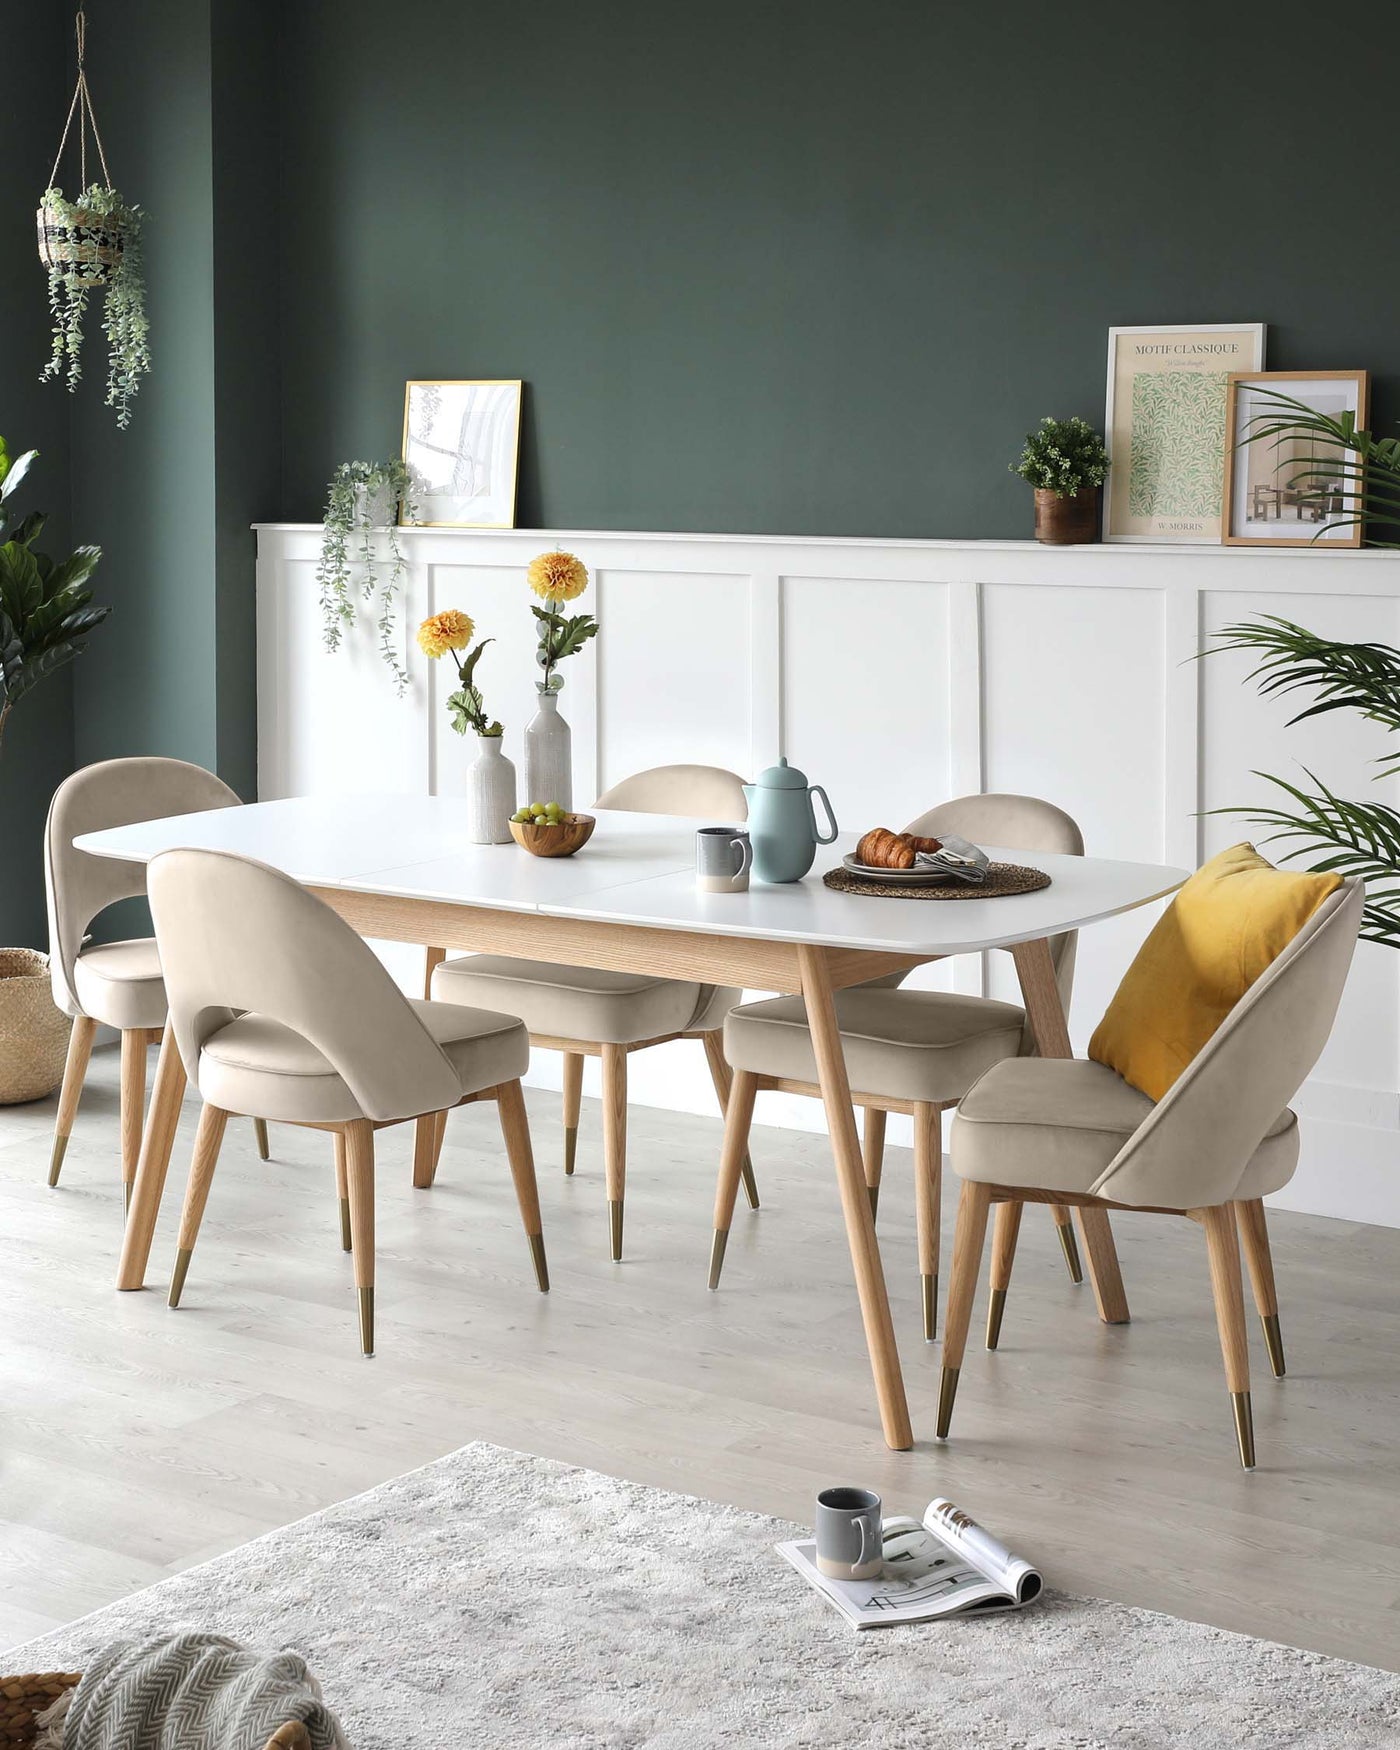 Modern dining room set featuring a white oval table with natural wood legs and a set of six matching upholstered chairs with smooth, beige fabric and tapered wood legs.